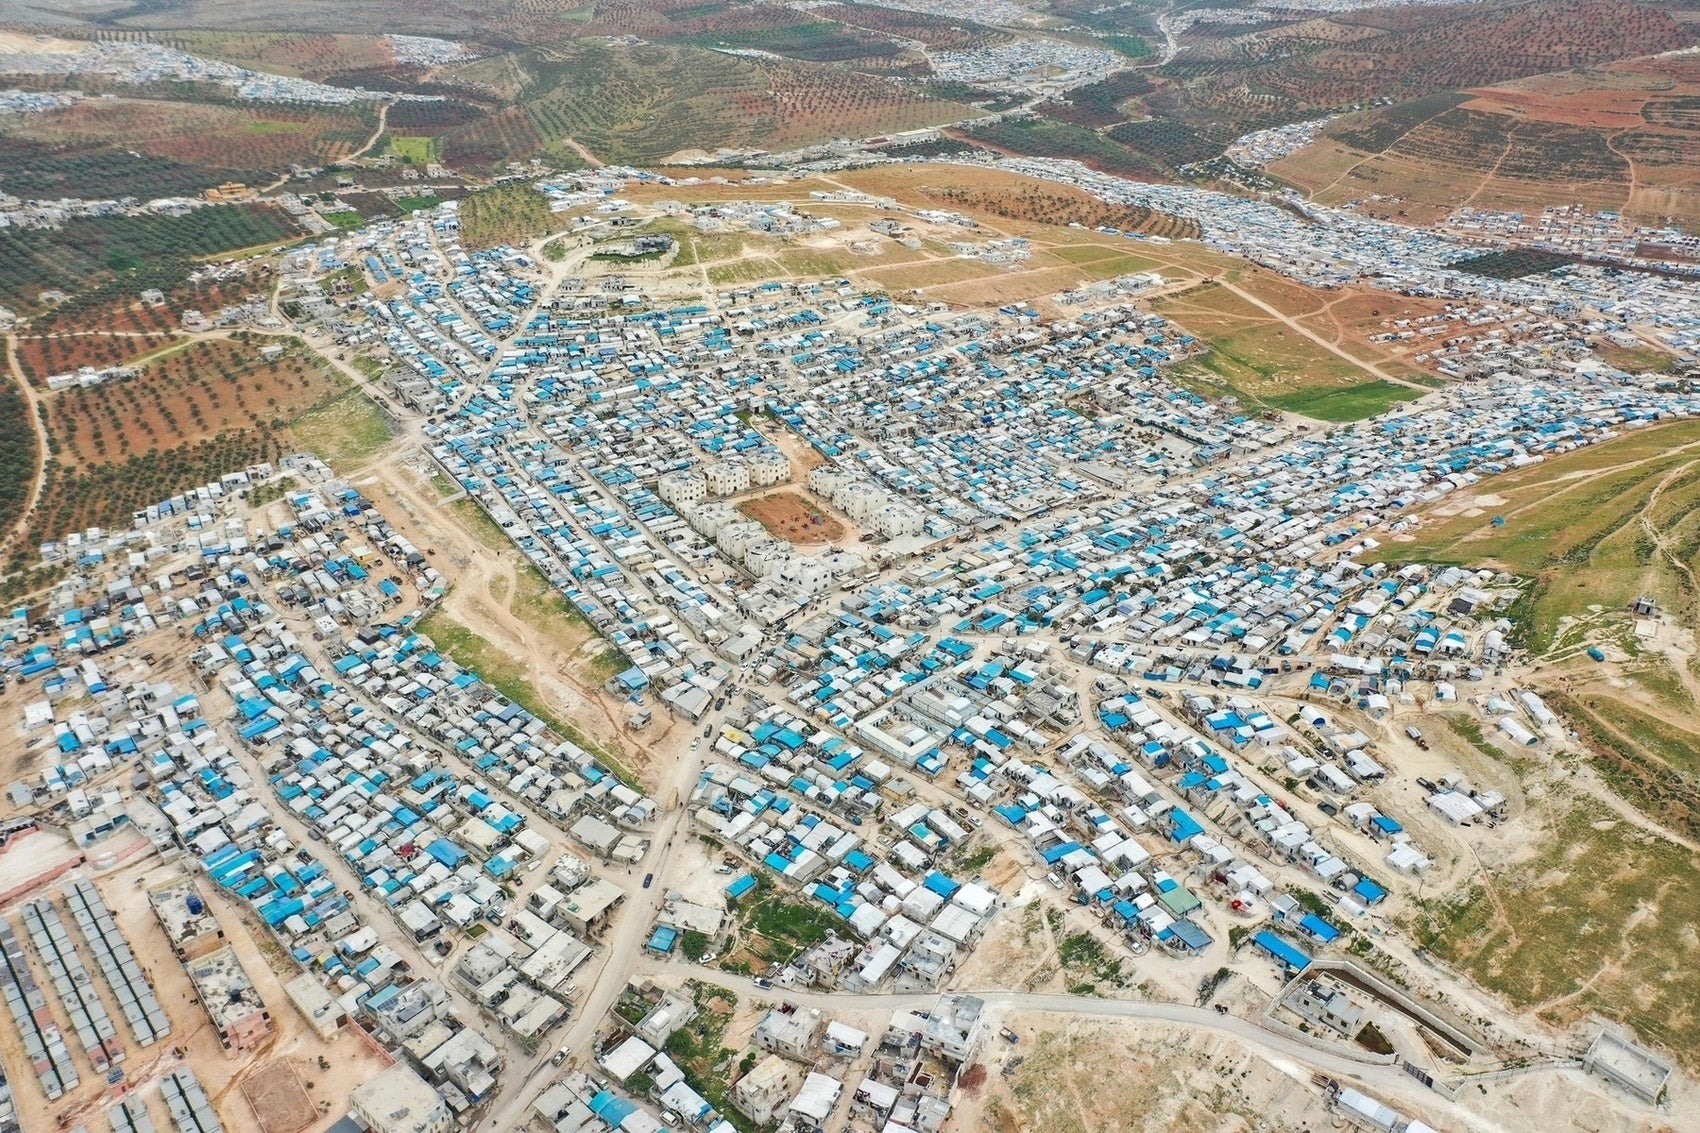 A drone image taken on April 21, 2020, shows a general view of the camp for internally displaced people pictured near Kah, in the northern Idlib province near the border with Turkey.